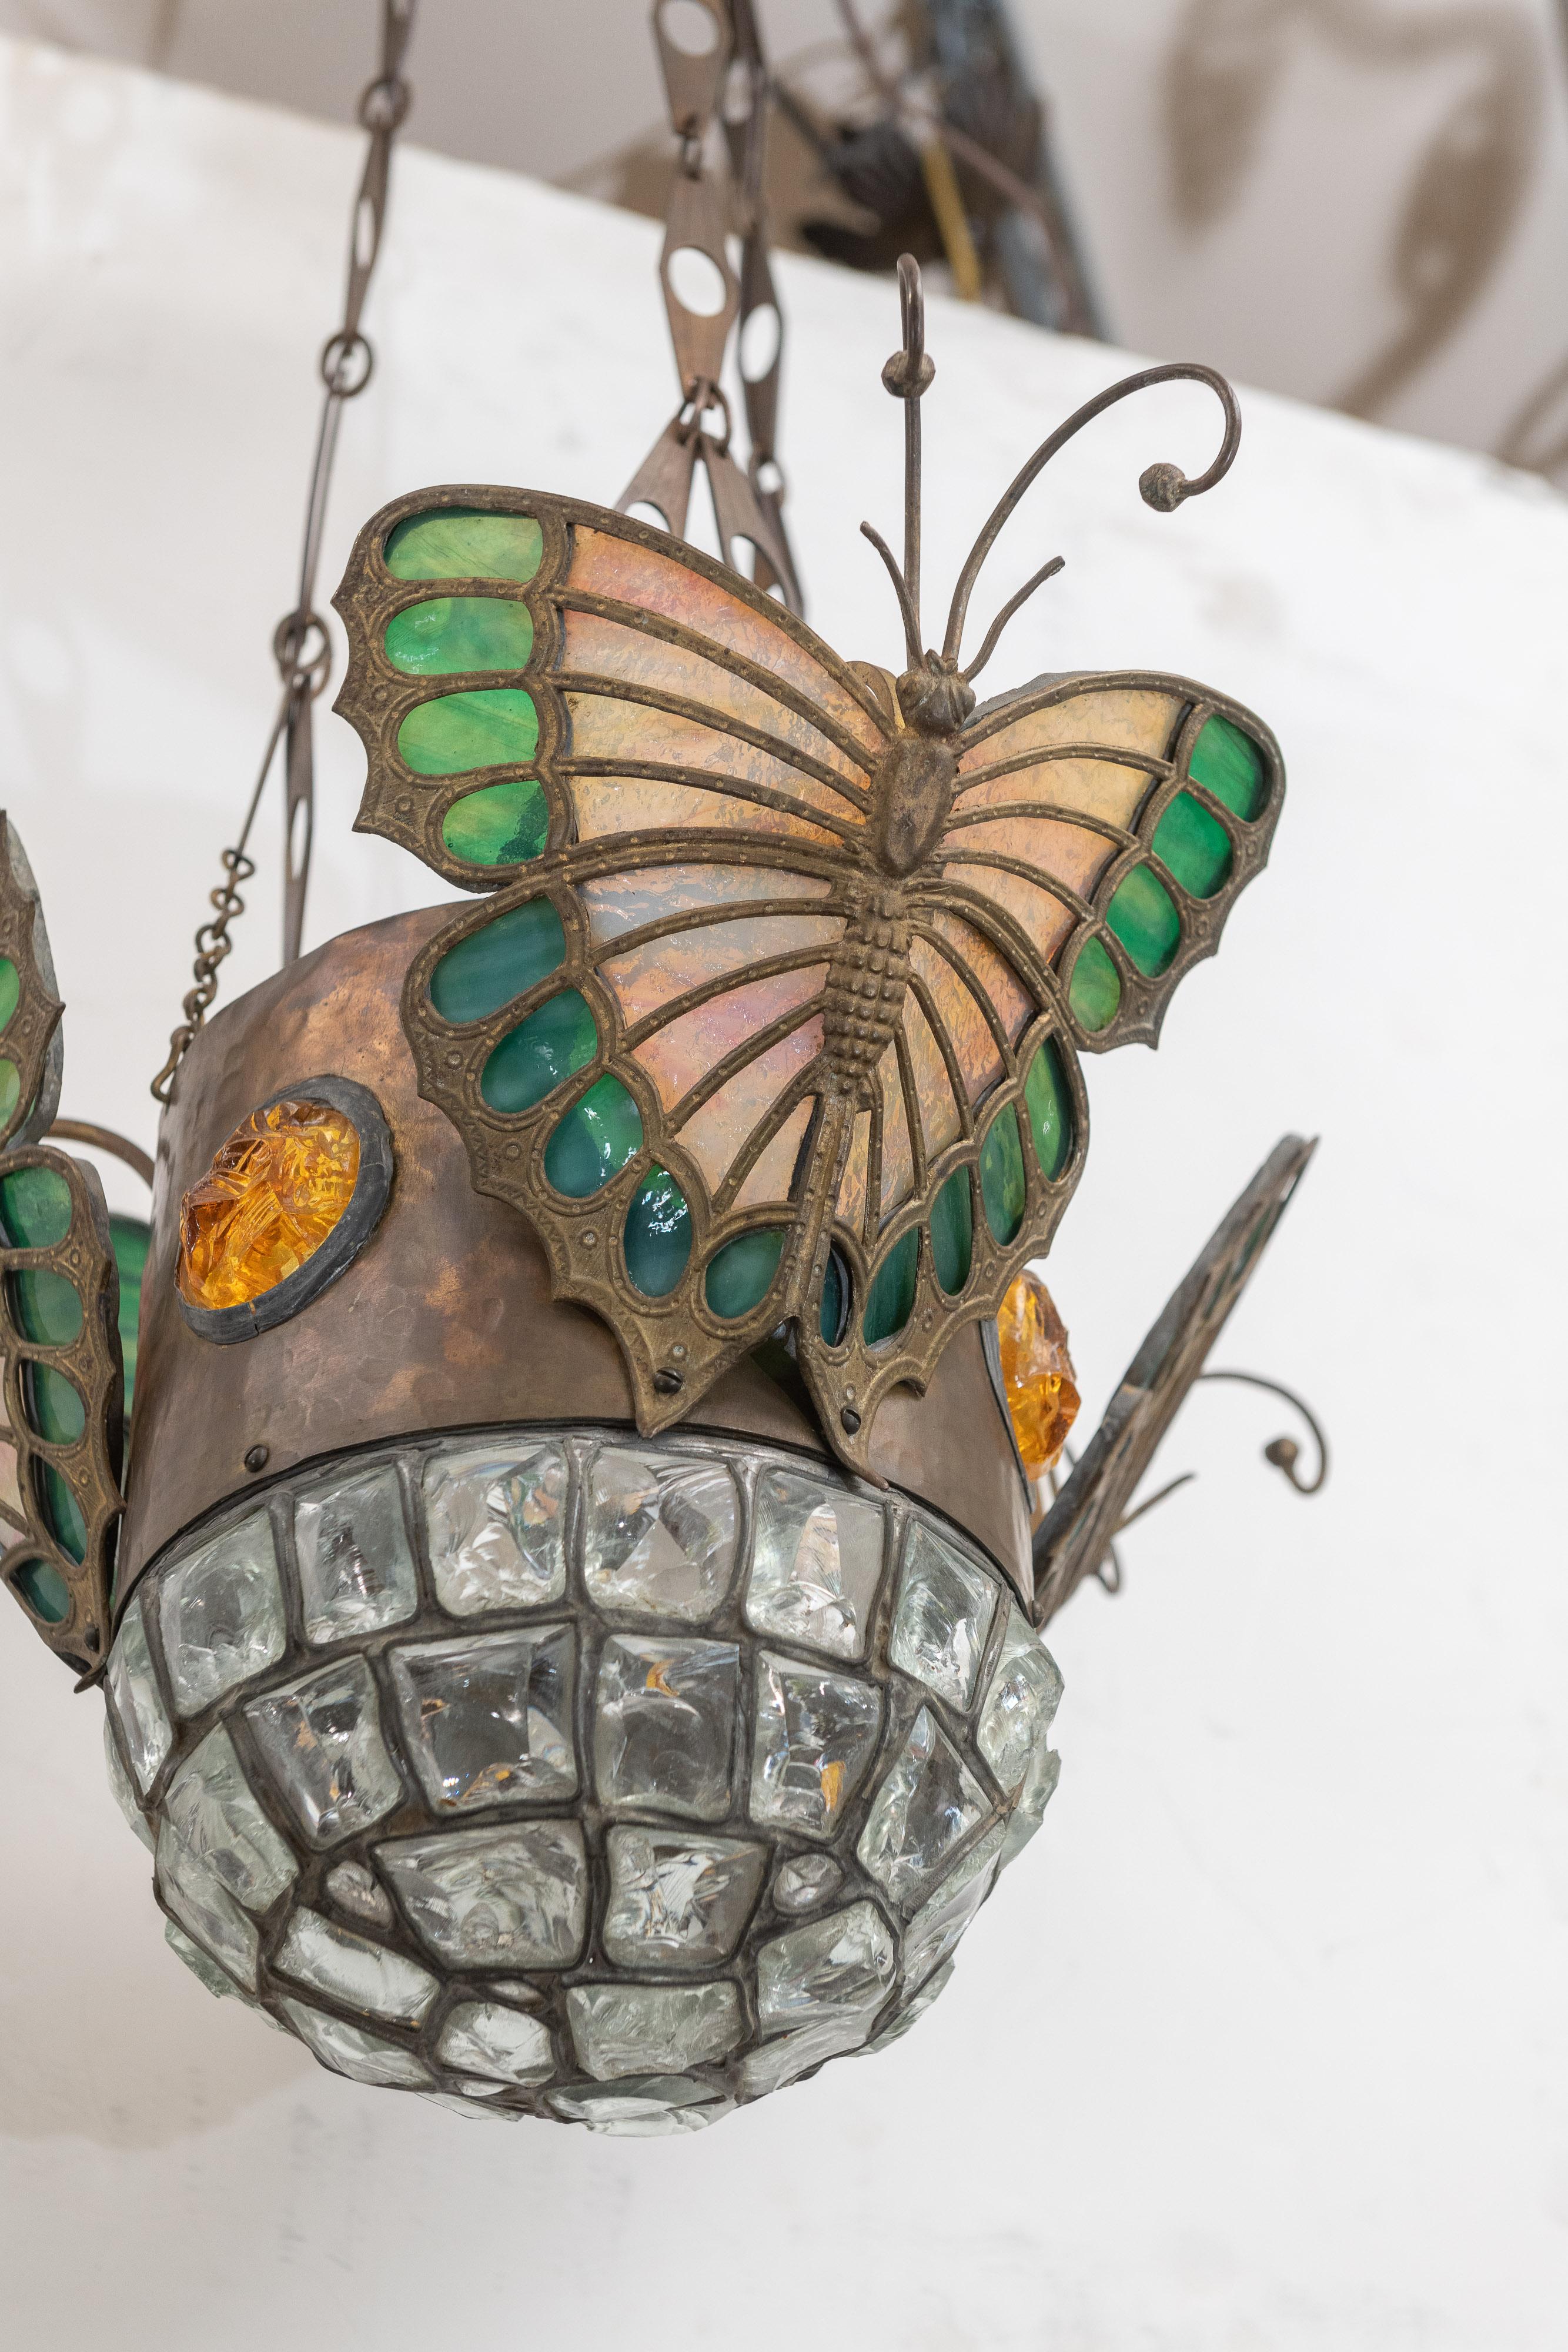 Early 20th Century Austrian Art Nouveau Pendant with Leaded Glass Butterflies and Chunk Glass